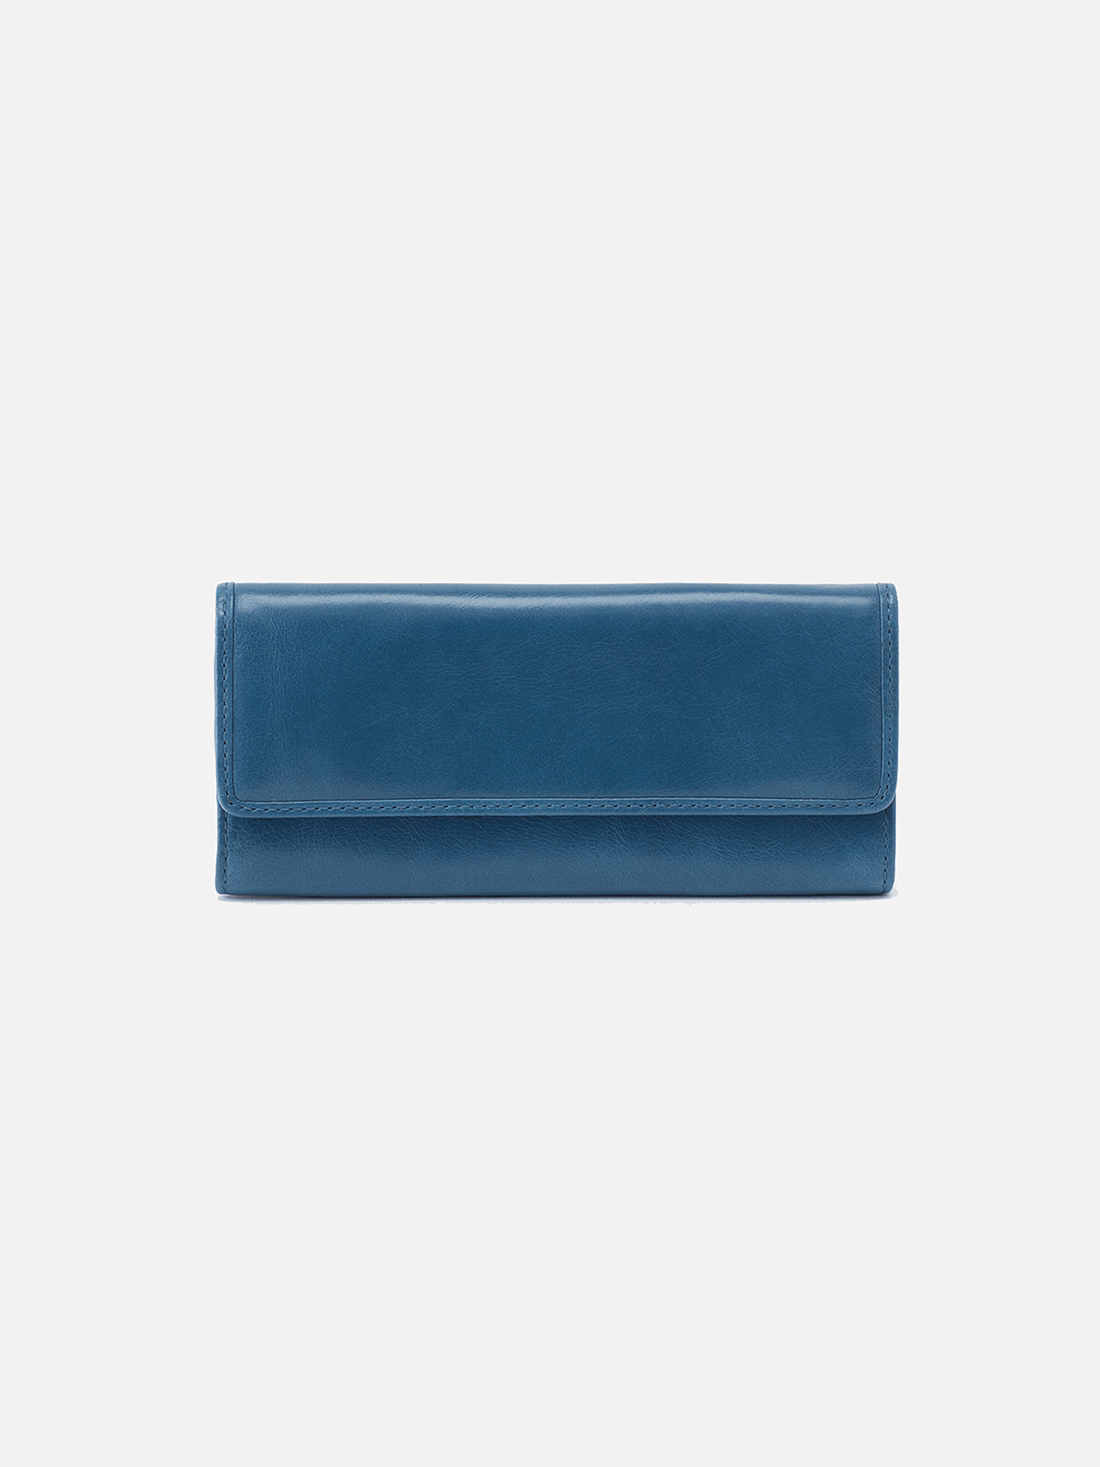 hobo ardor continental trifold wallet in riviera blue polished leather